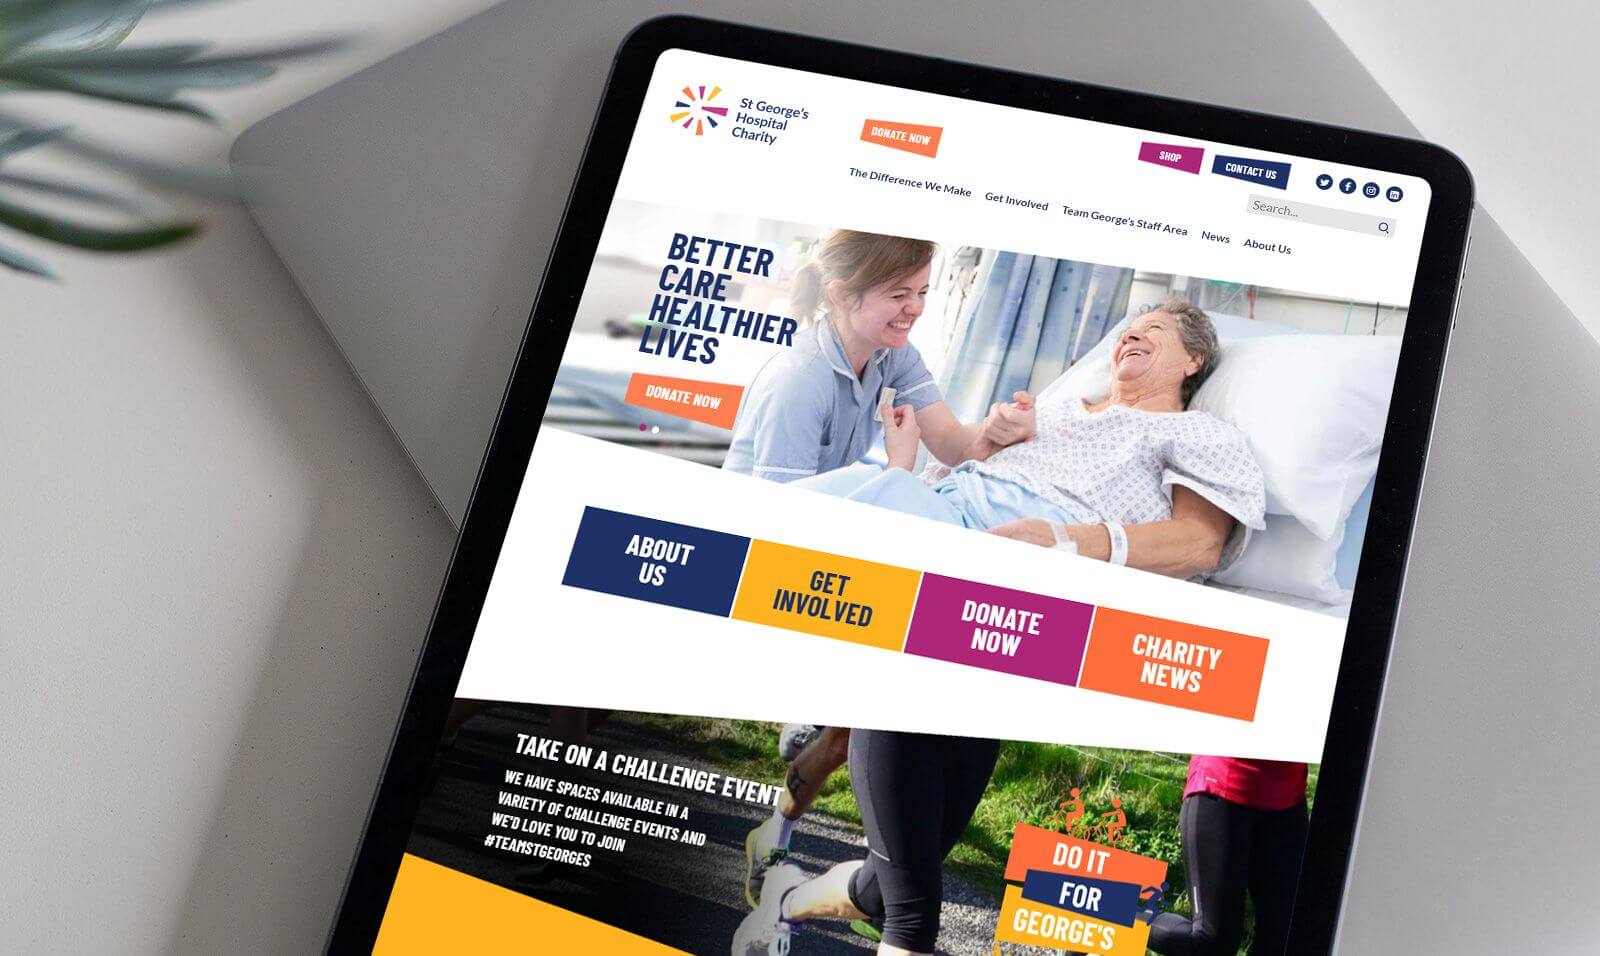 St George's Hospital Charity New Website